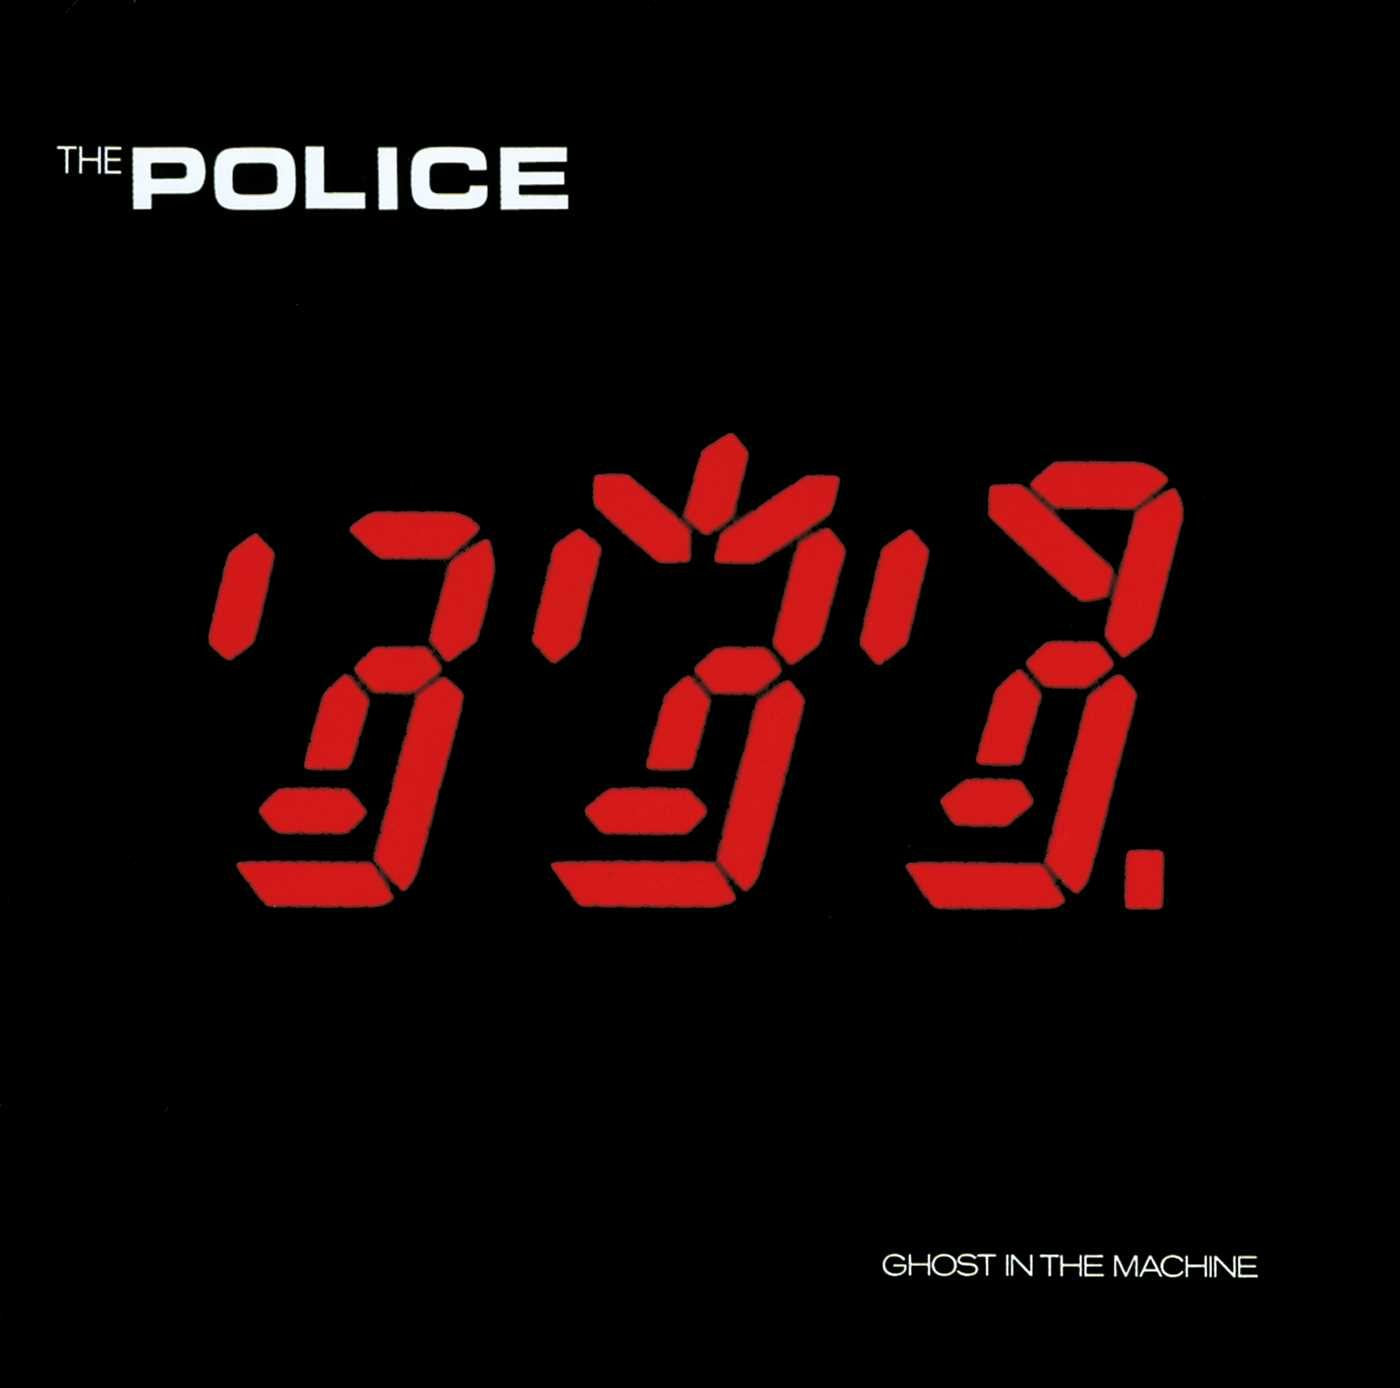 THE POLICE 'GHOST IN THE MACHINE' LP